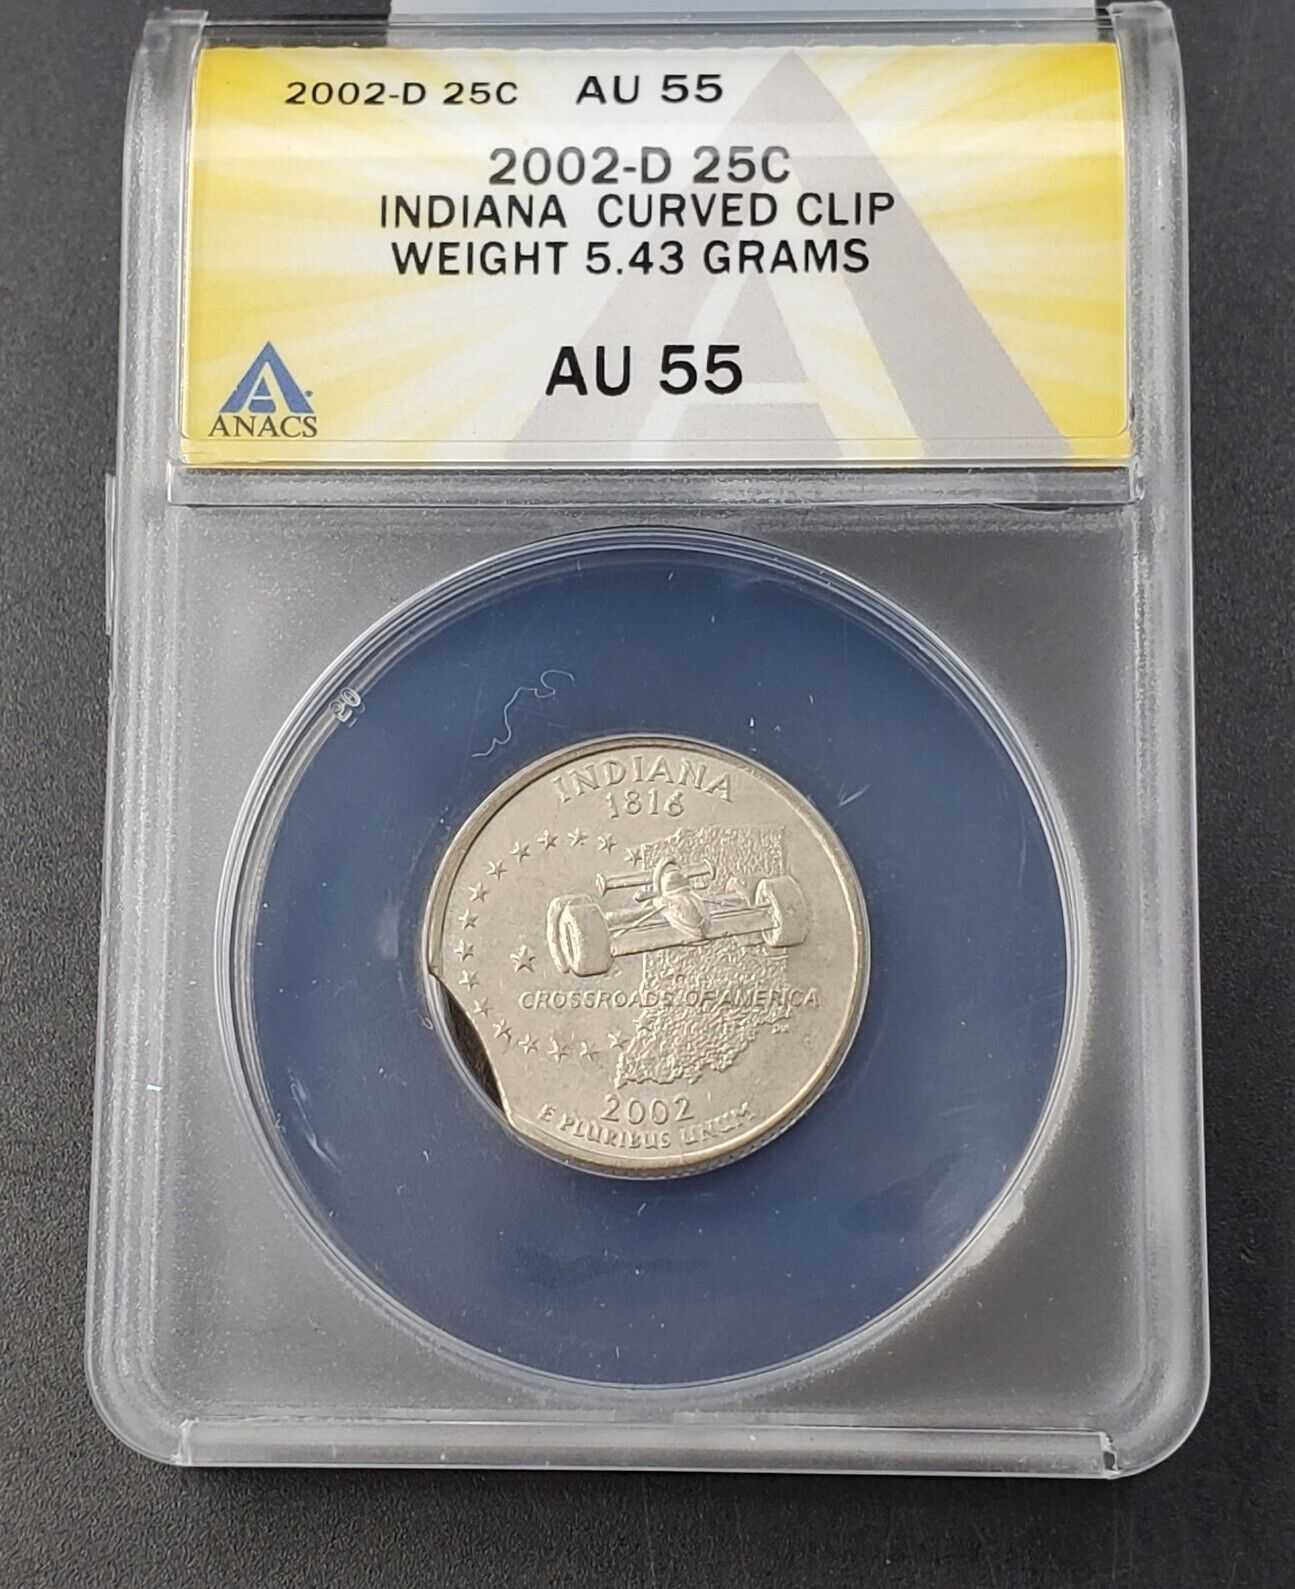 2002 D 25c W Indiana Quarters ANACS AU55 CURVED CLIP Weight 5.43 Grams Error